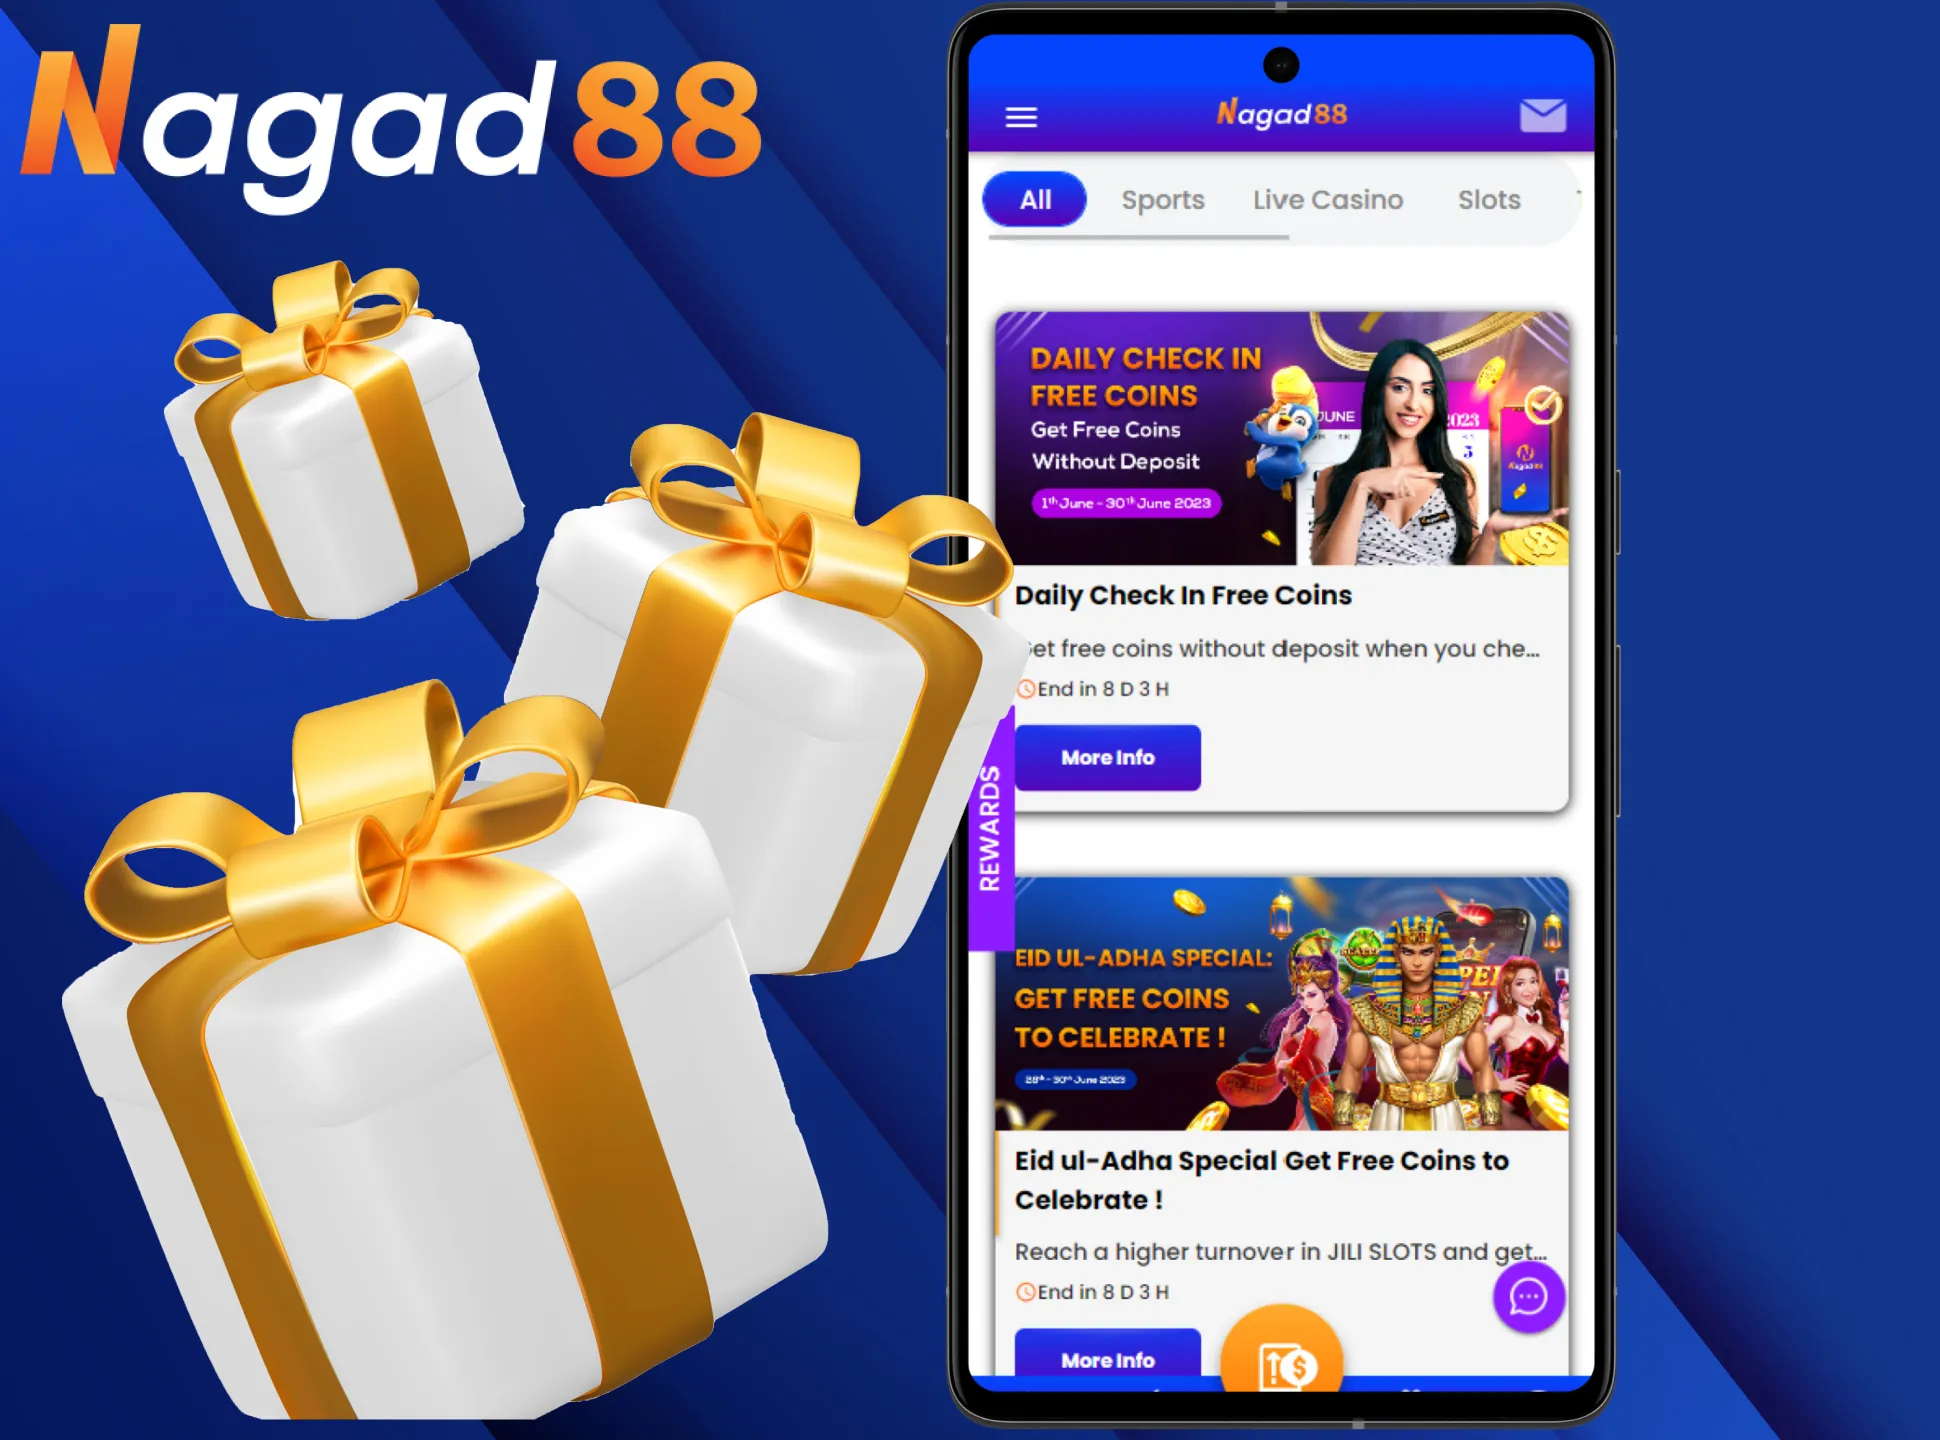 Nagad88 offers a lot of lucrative bonuses for mobile players.